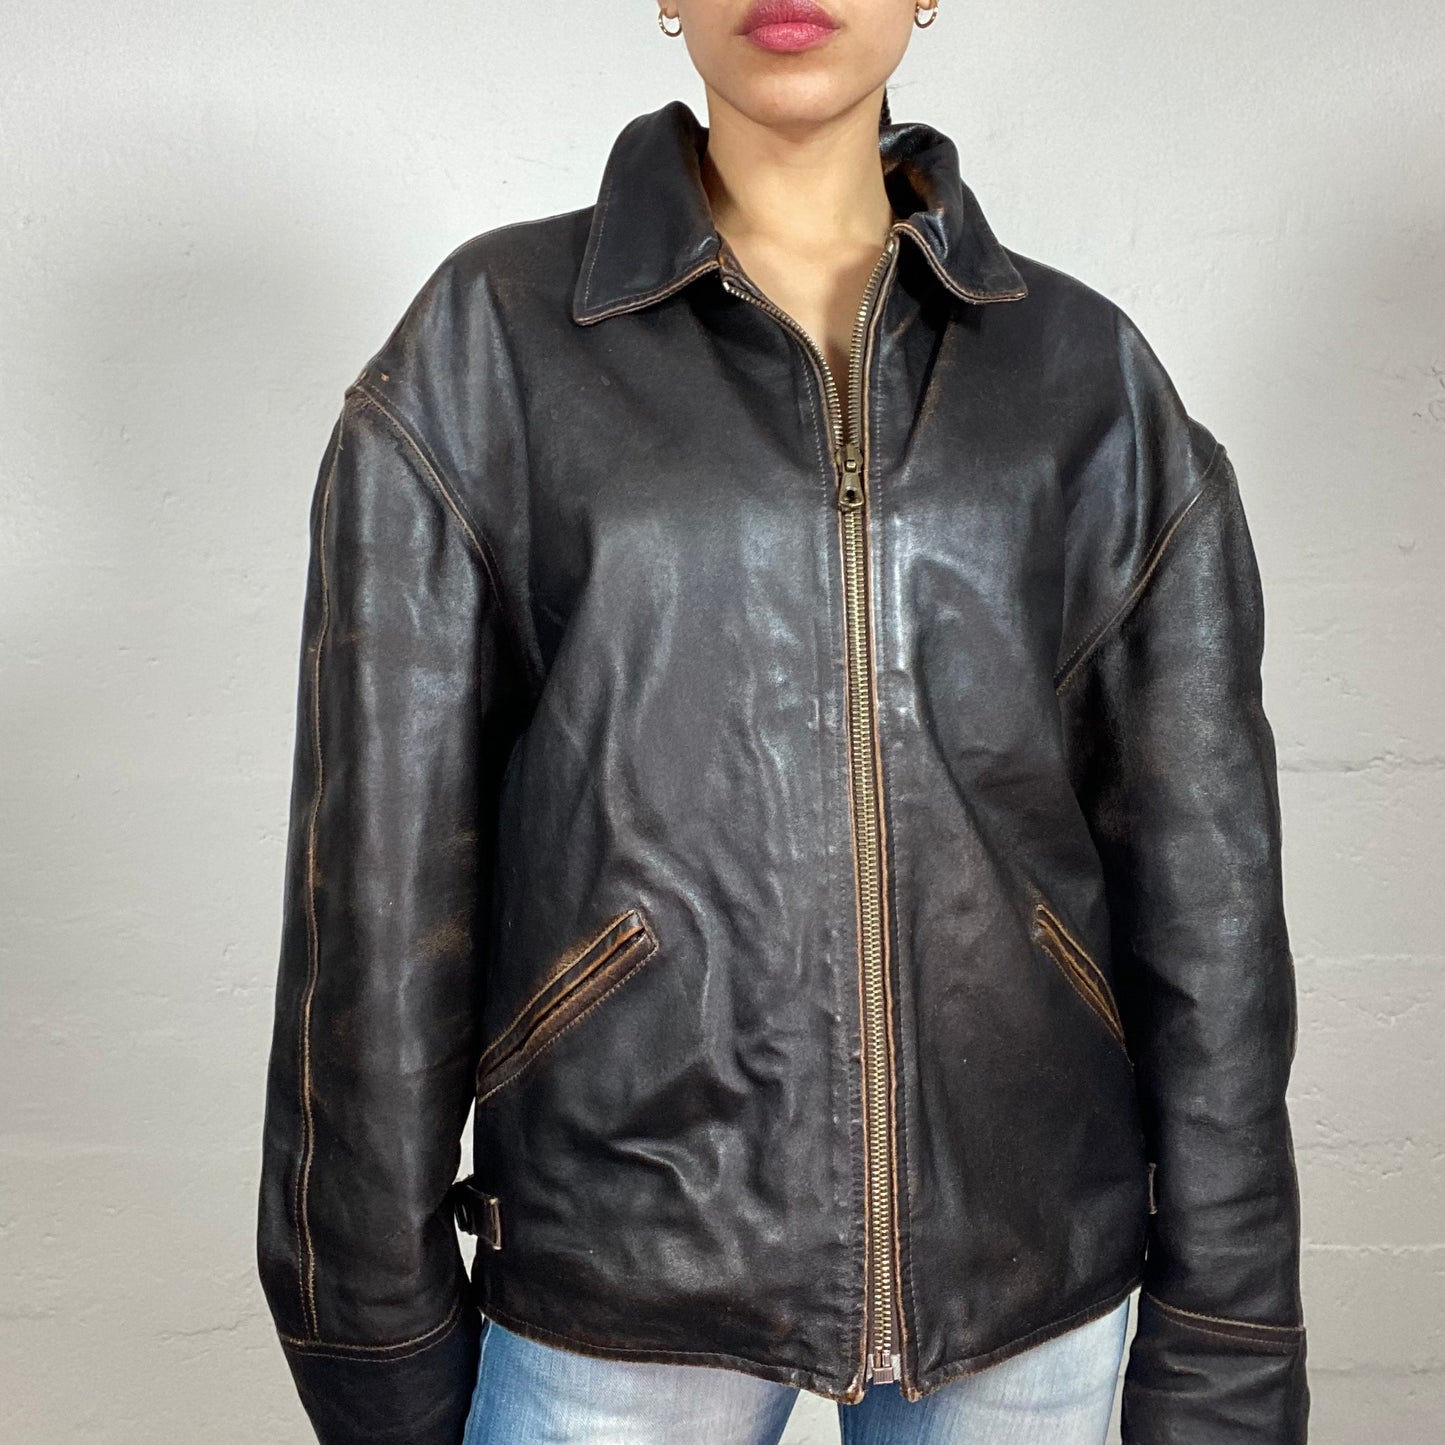 Vintage 2000's Biker Girl Brown Leather Faded Colour Zip Up Bomber Jacket with Zipped Pockets (L)